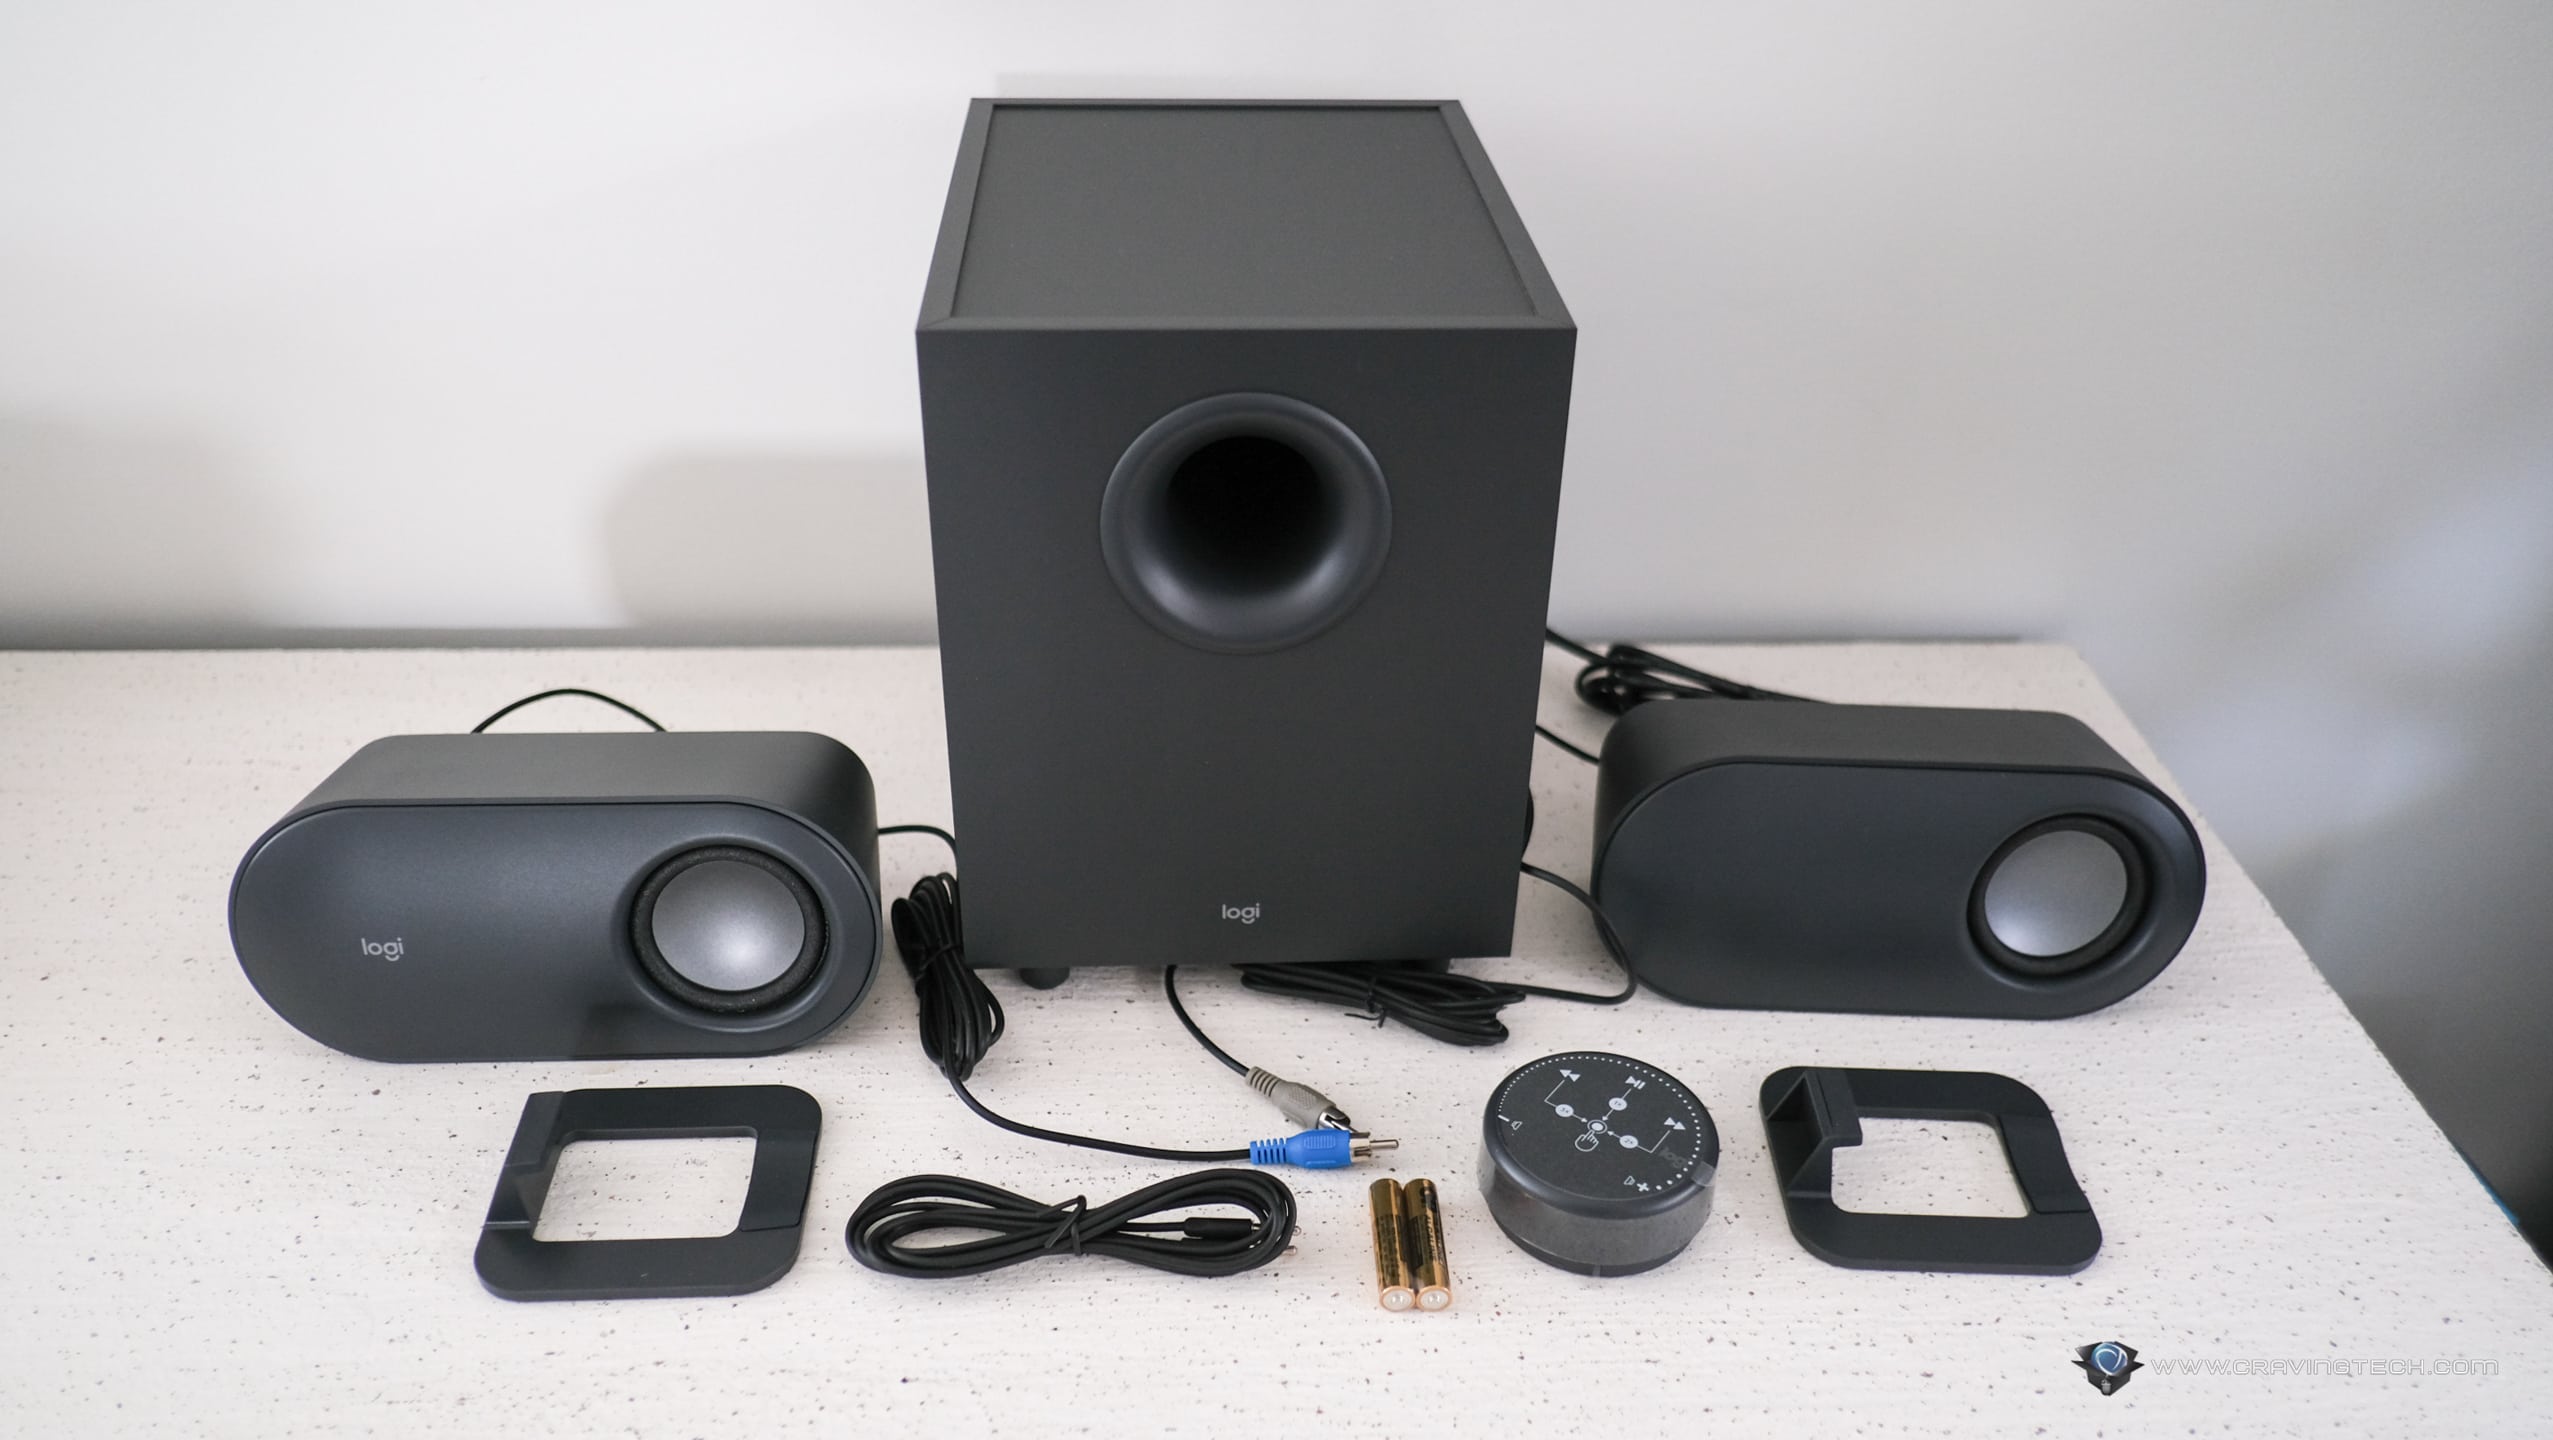 Z407 Bluetooth Computer Speakers with Subwoofer and Wireless control